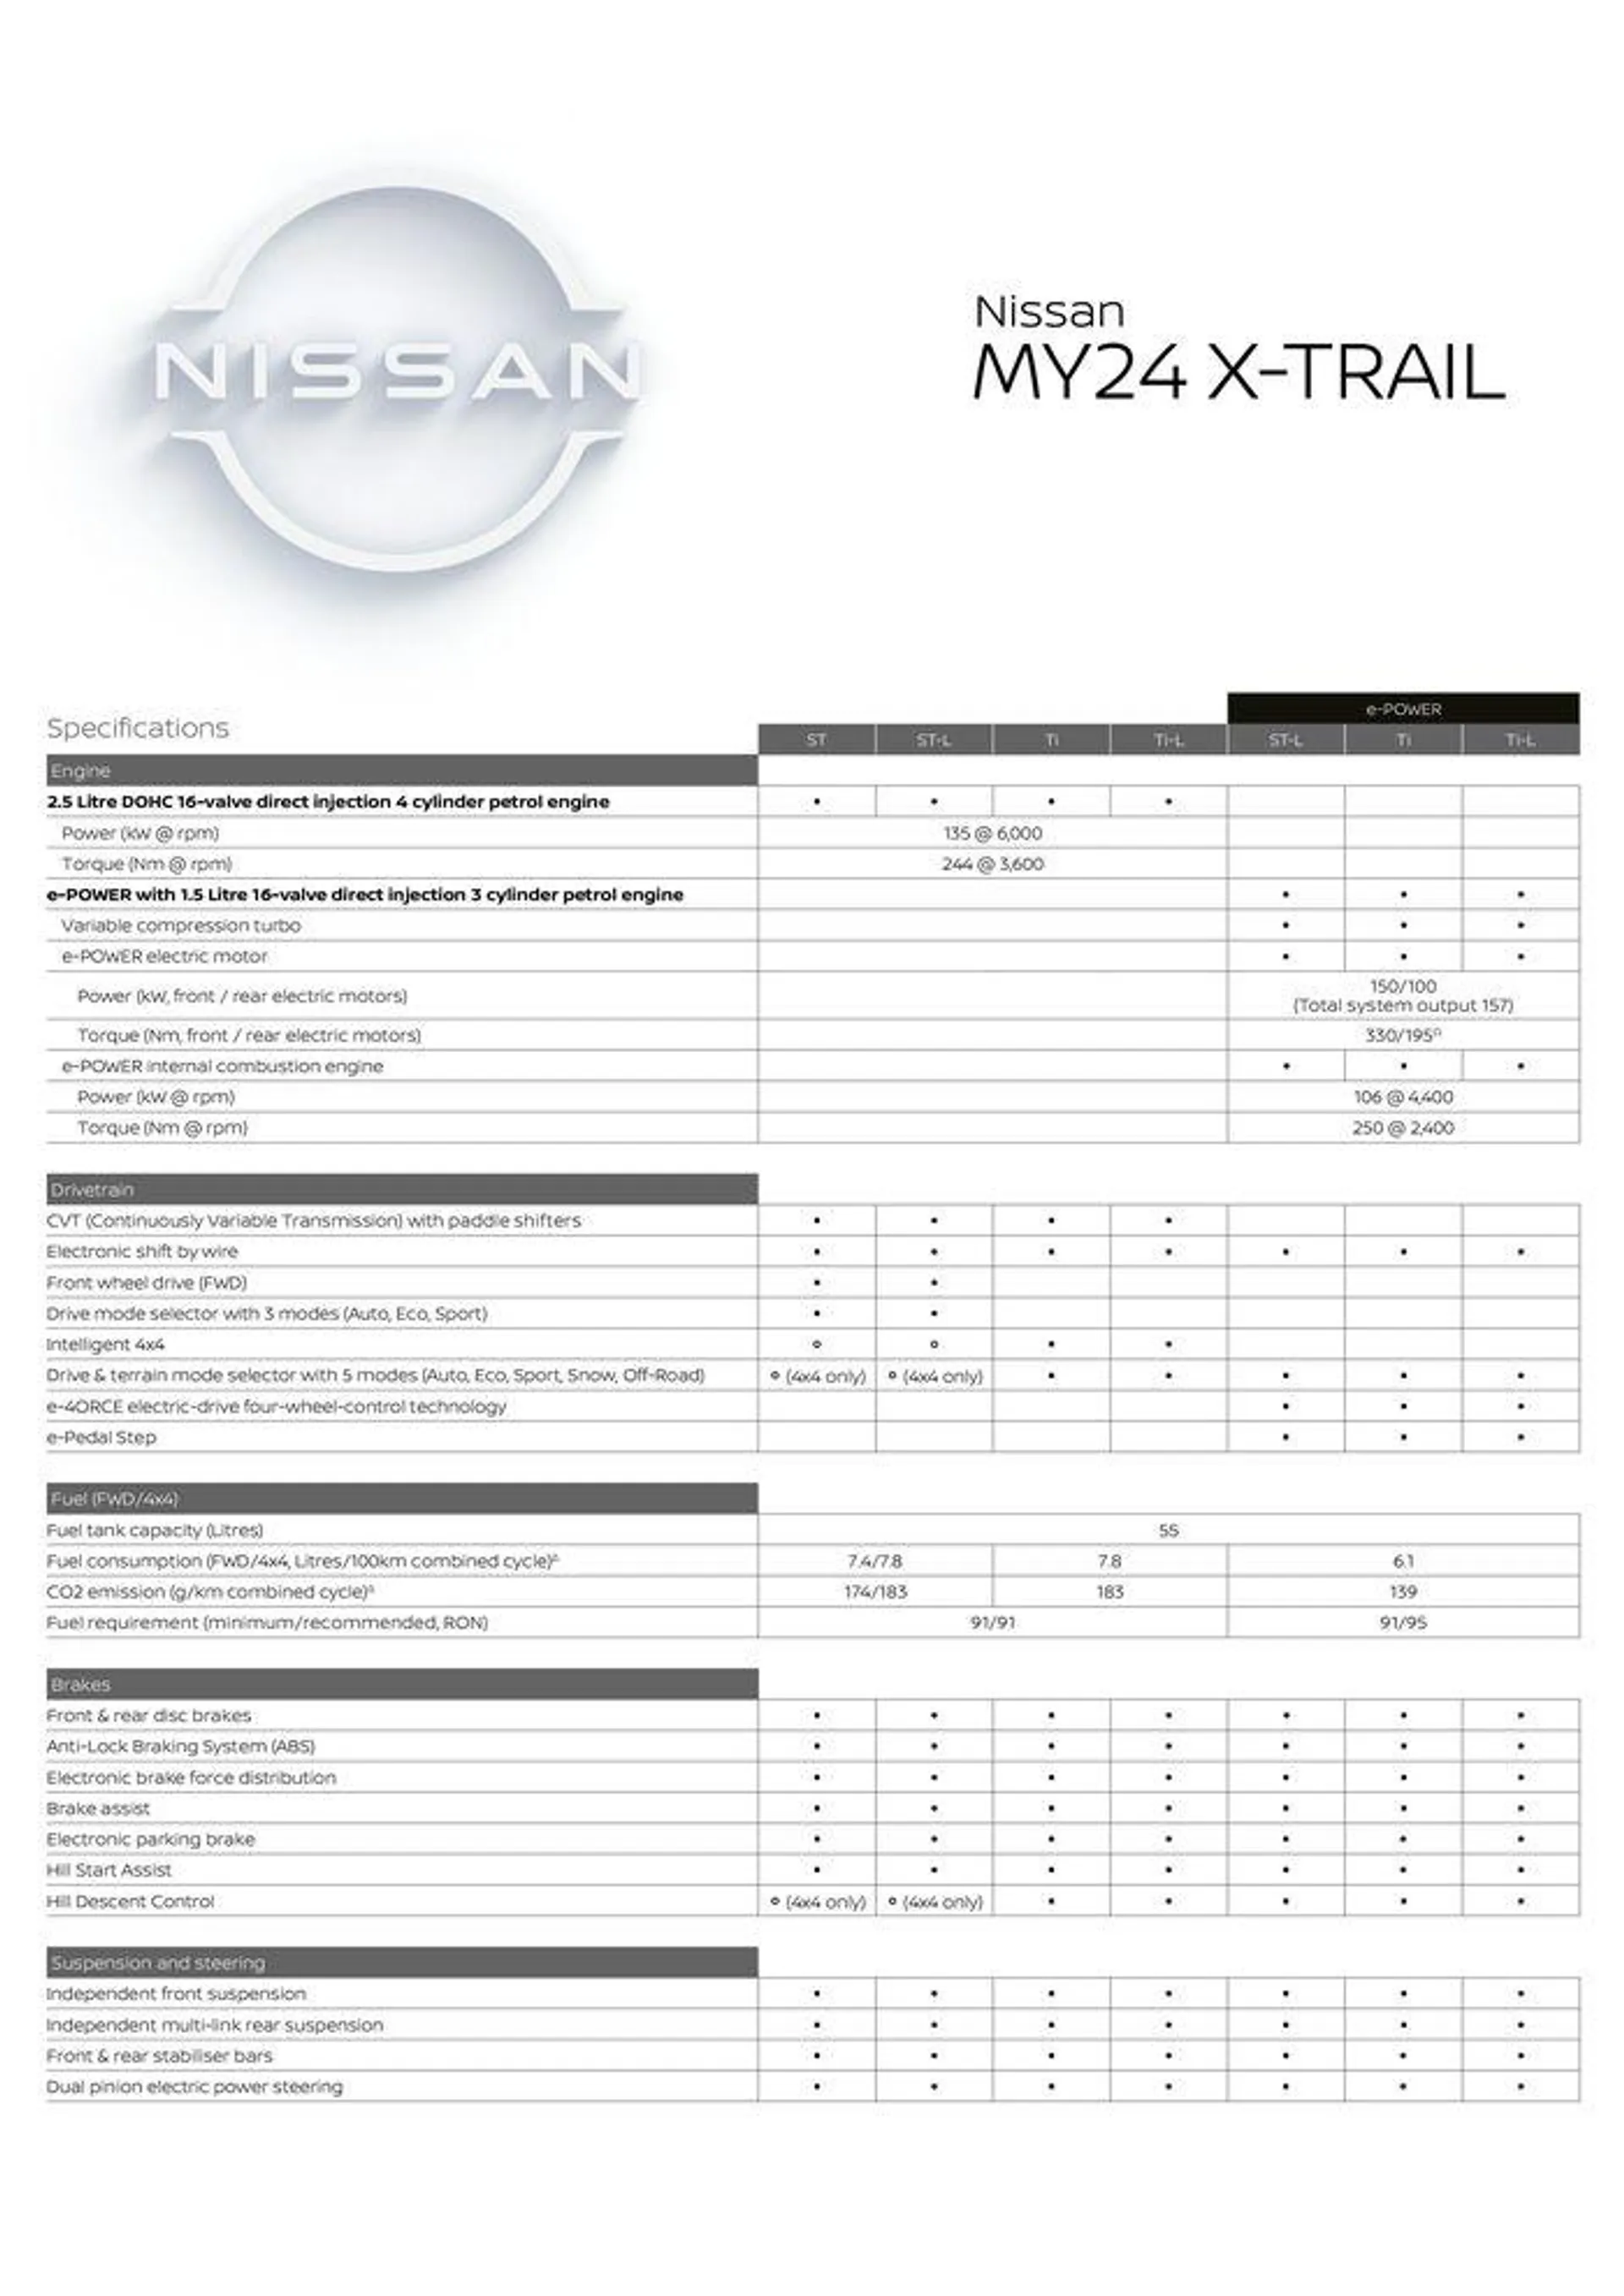 Nissan MY24 X-TRAIL Specification Sheets - 1